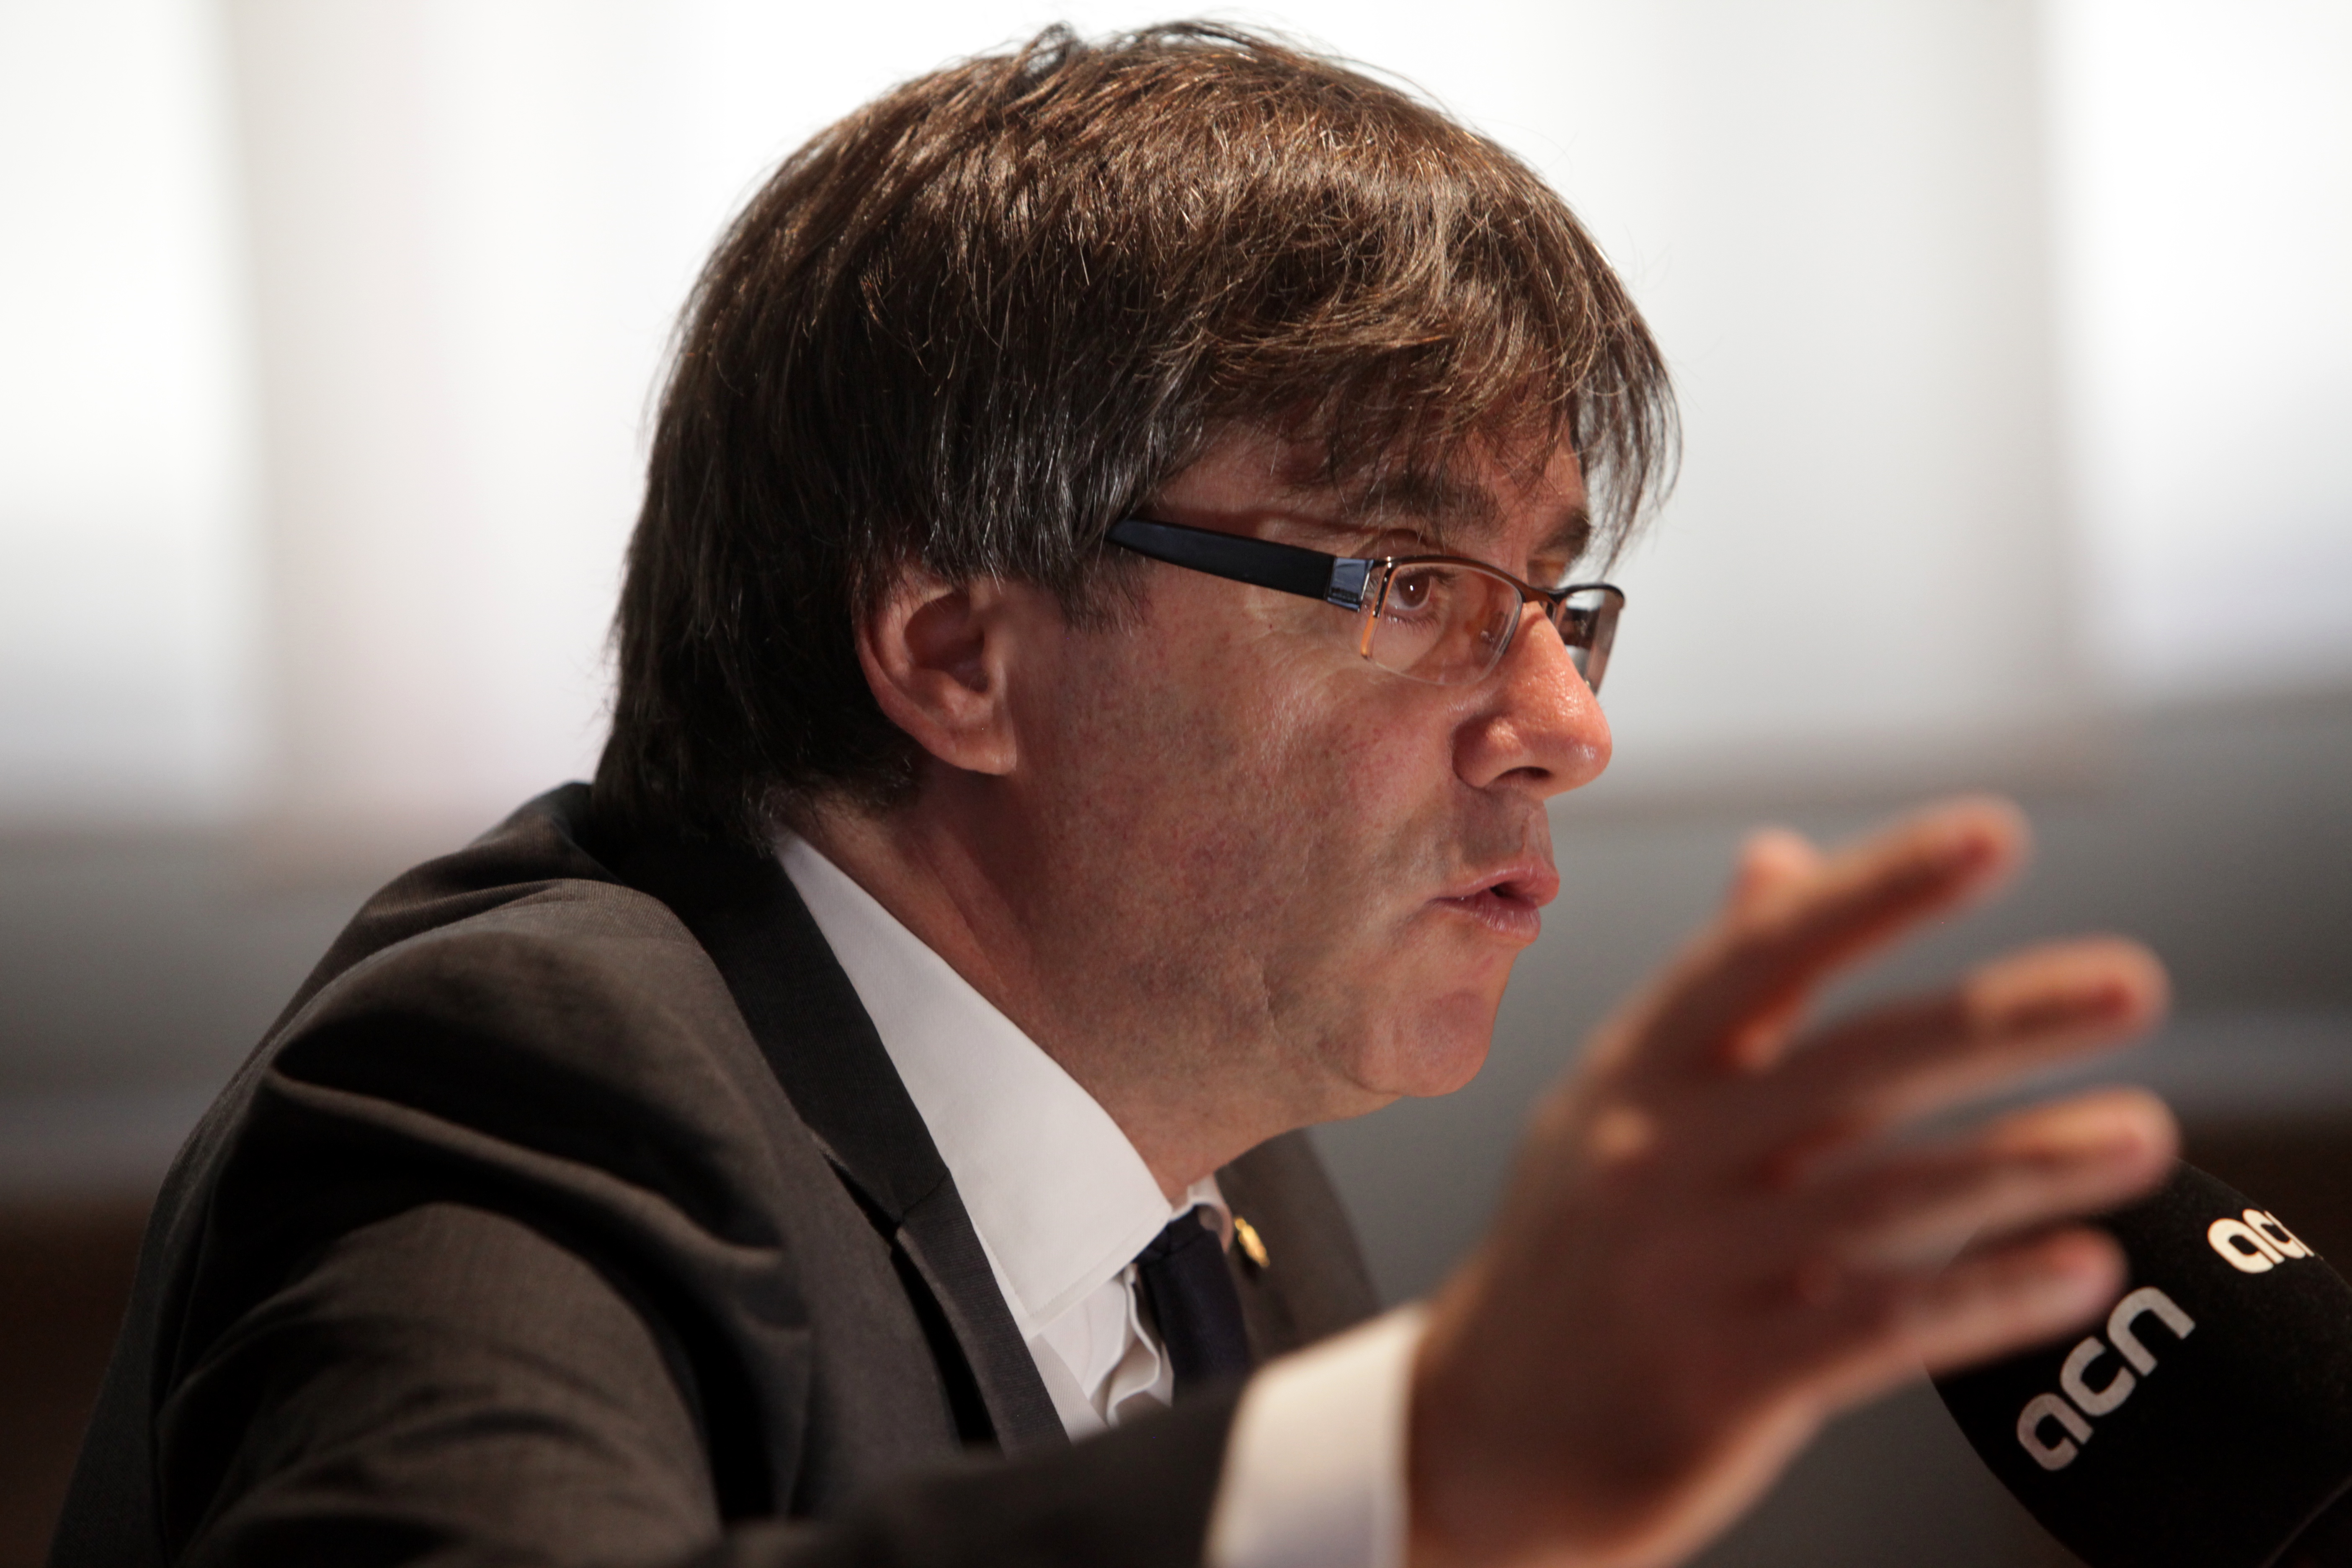 The Catalan President, Carles Puigdemont, during the interview with the CNA (by V.Gumà)